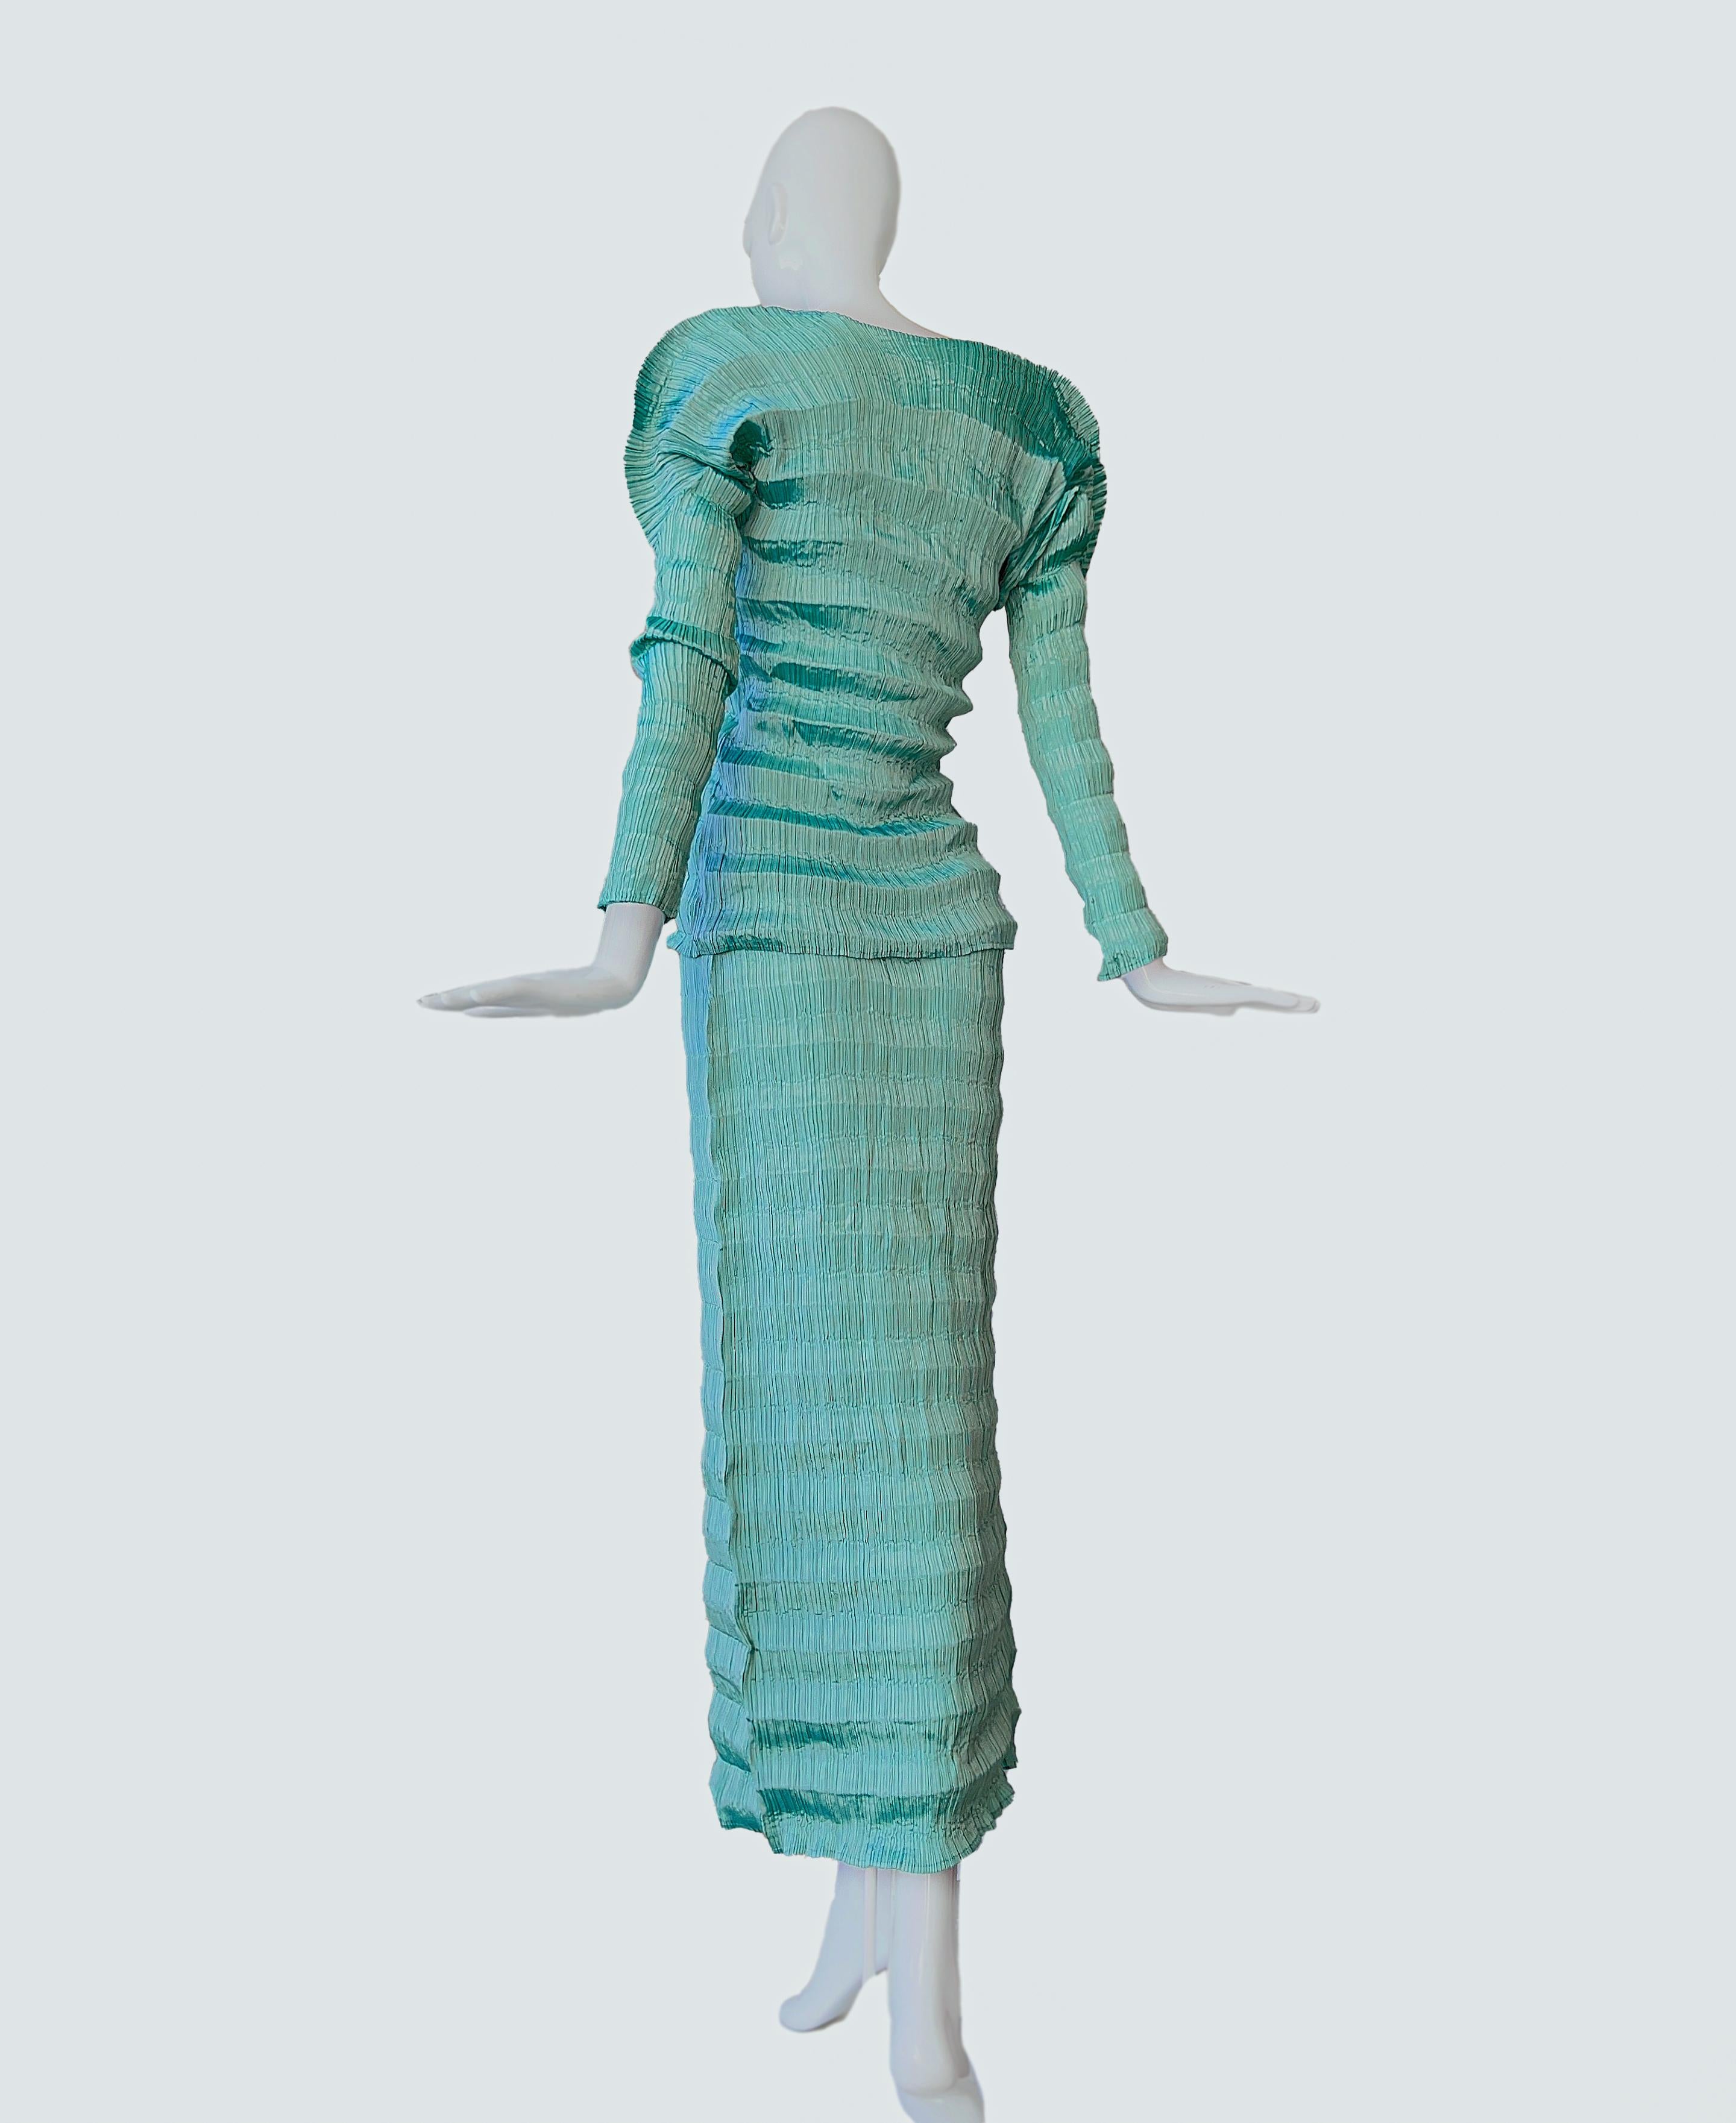 Blue Issey Miyake 1990's Pleated Sculptural Ensemble Top Skirt Iridescent Teal For Sale